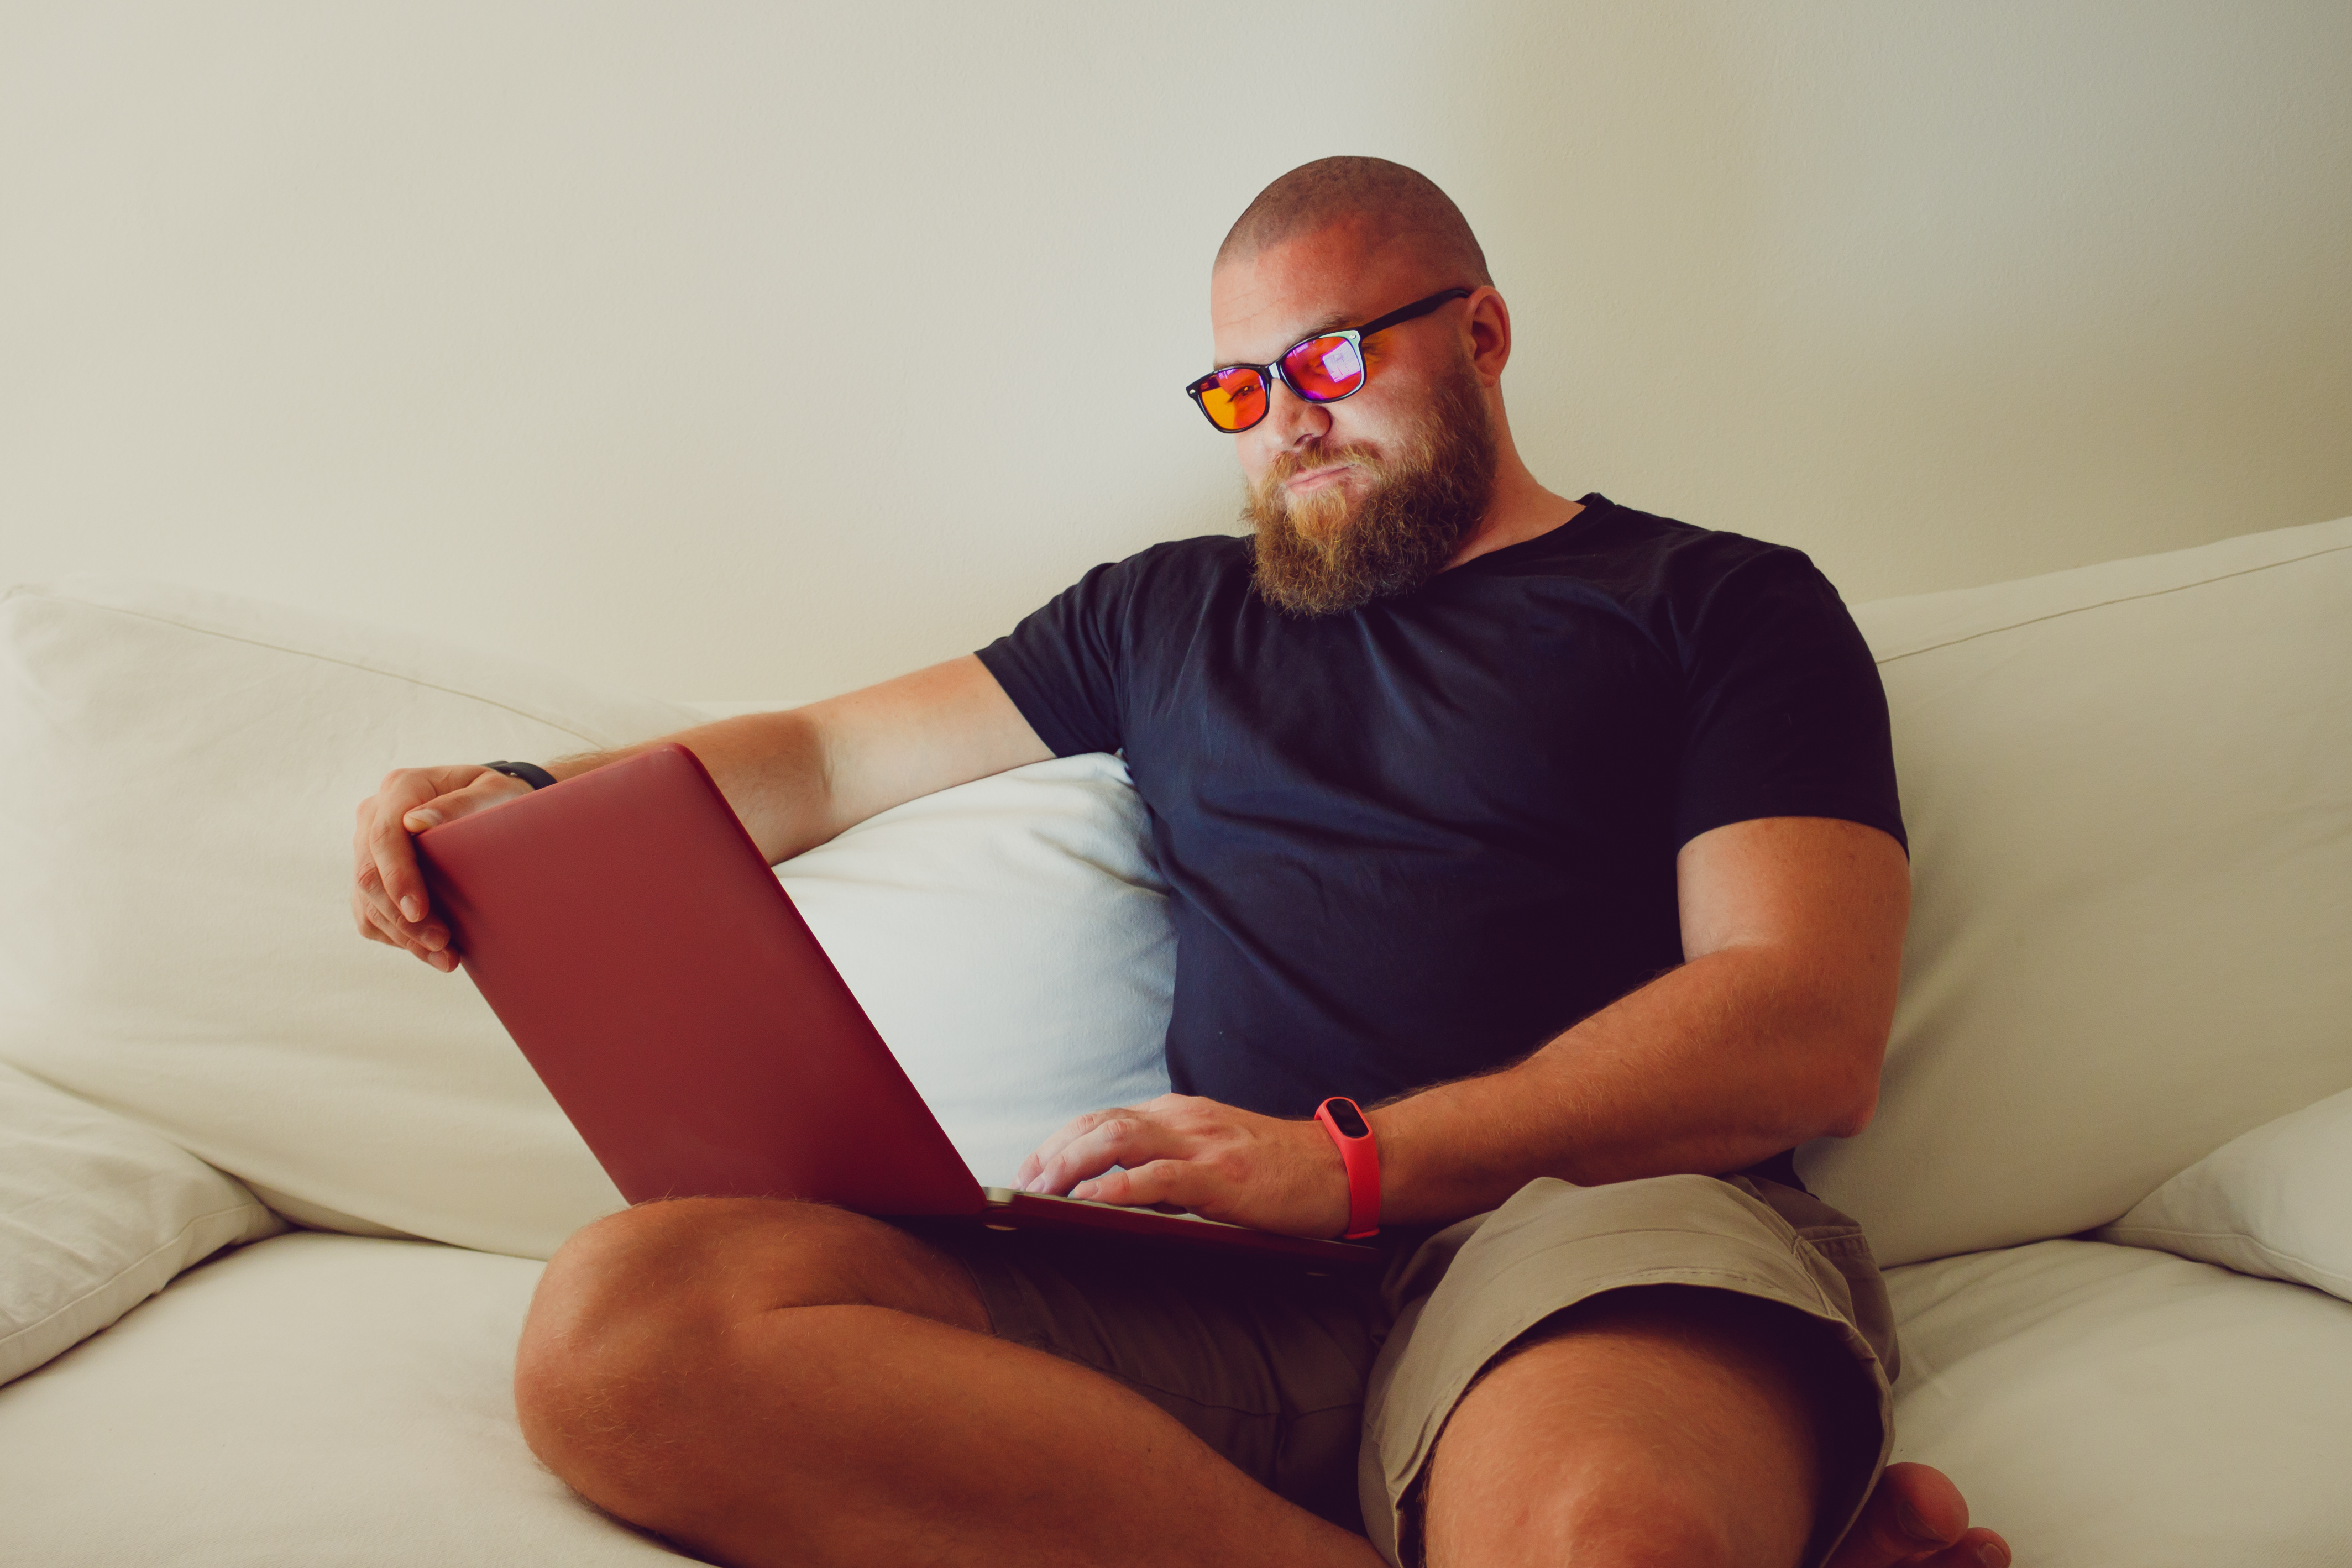 Man with beard sitting on couch using computer wearing blue light glasses